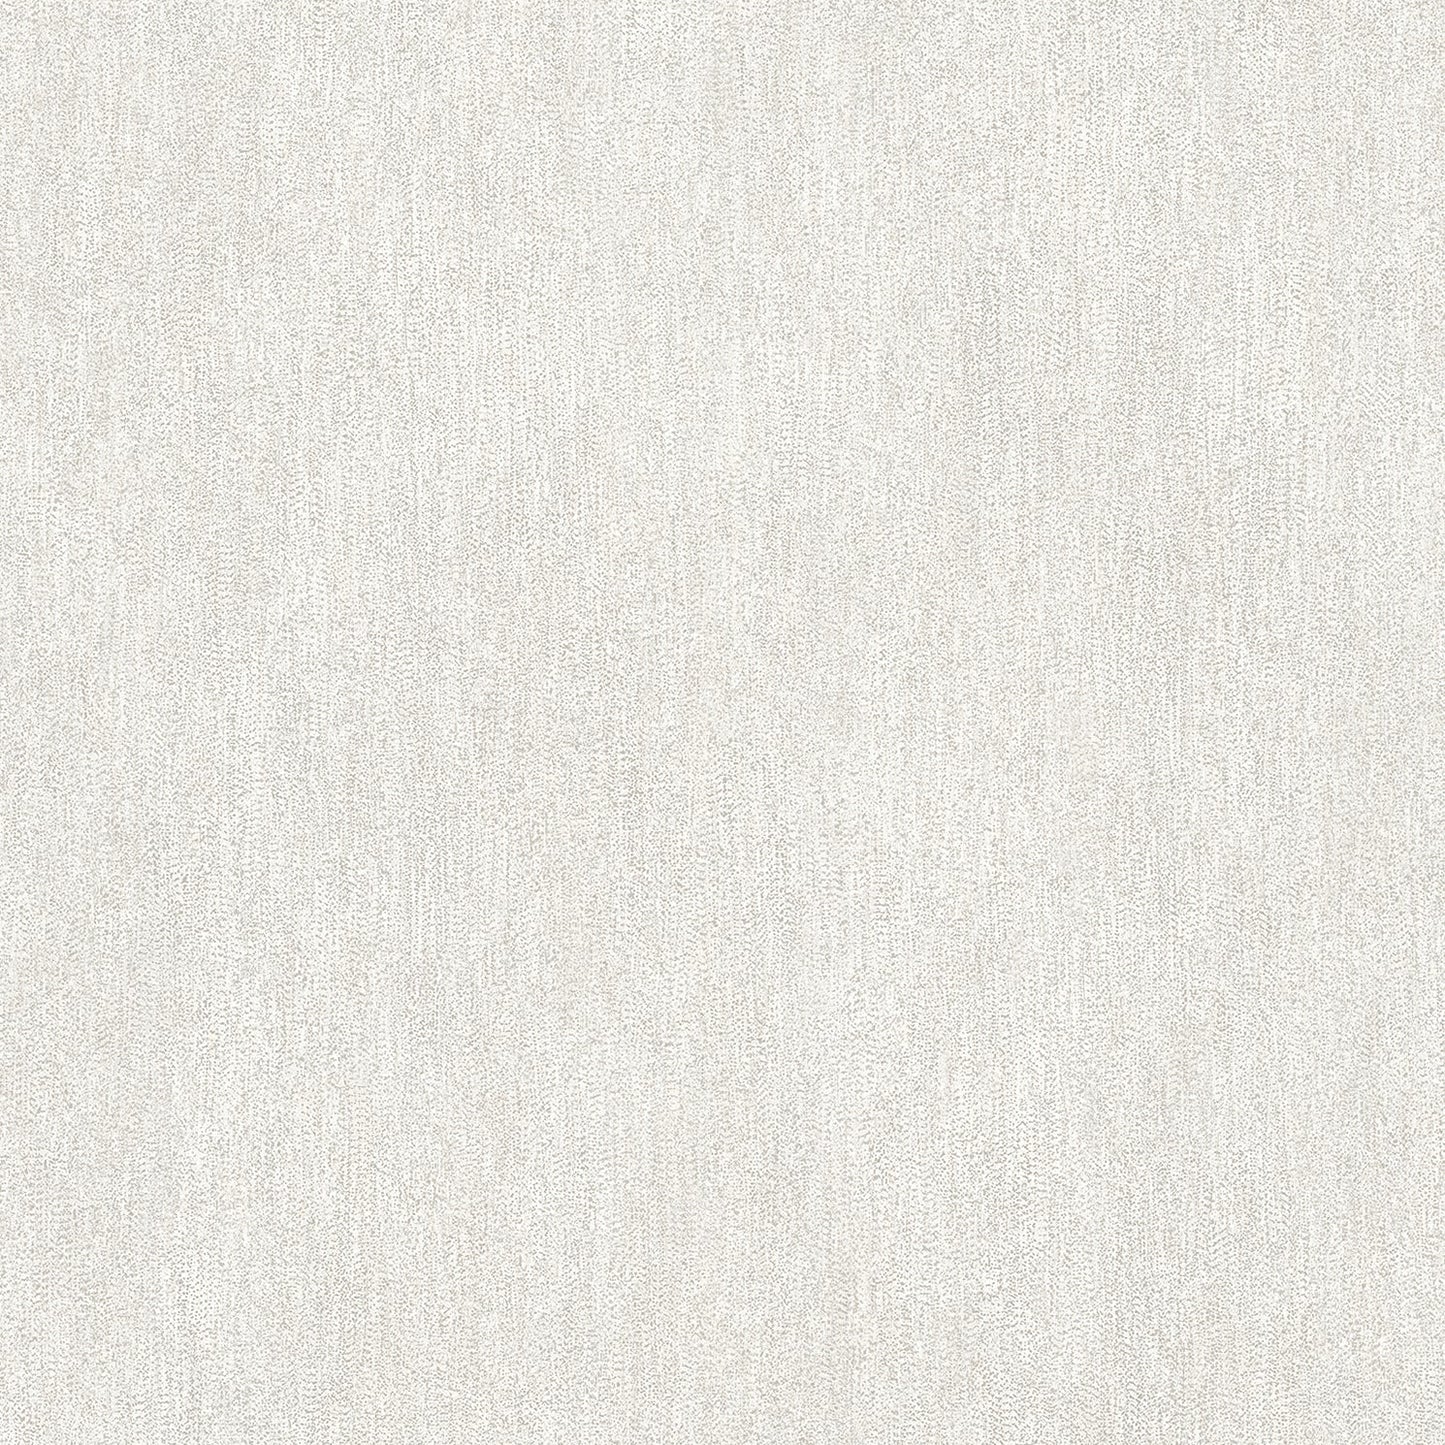 View 4020-09107 Geo & Textures Arlo Taupe Speckle Taupe by Advantage